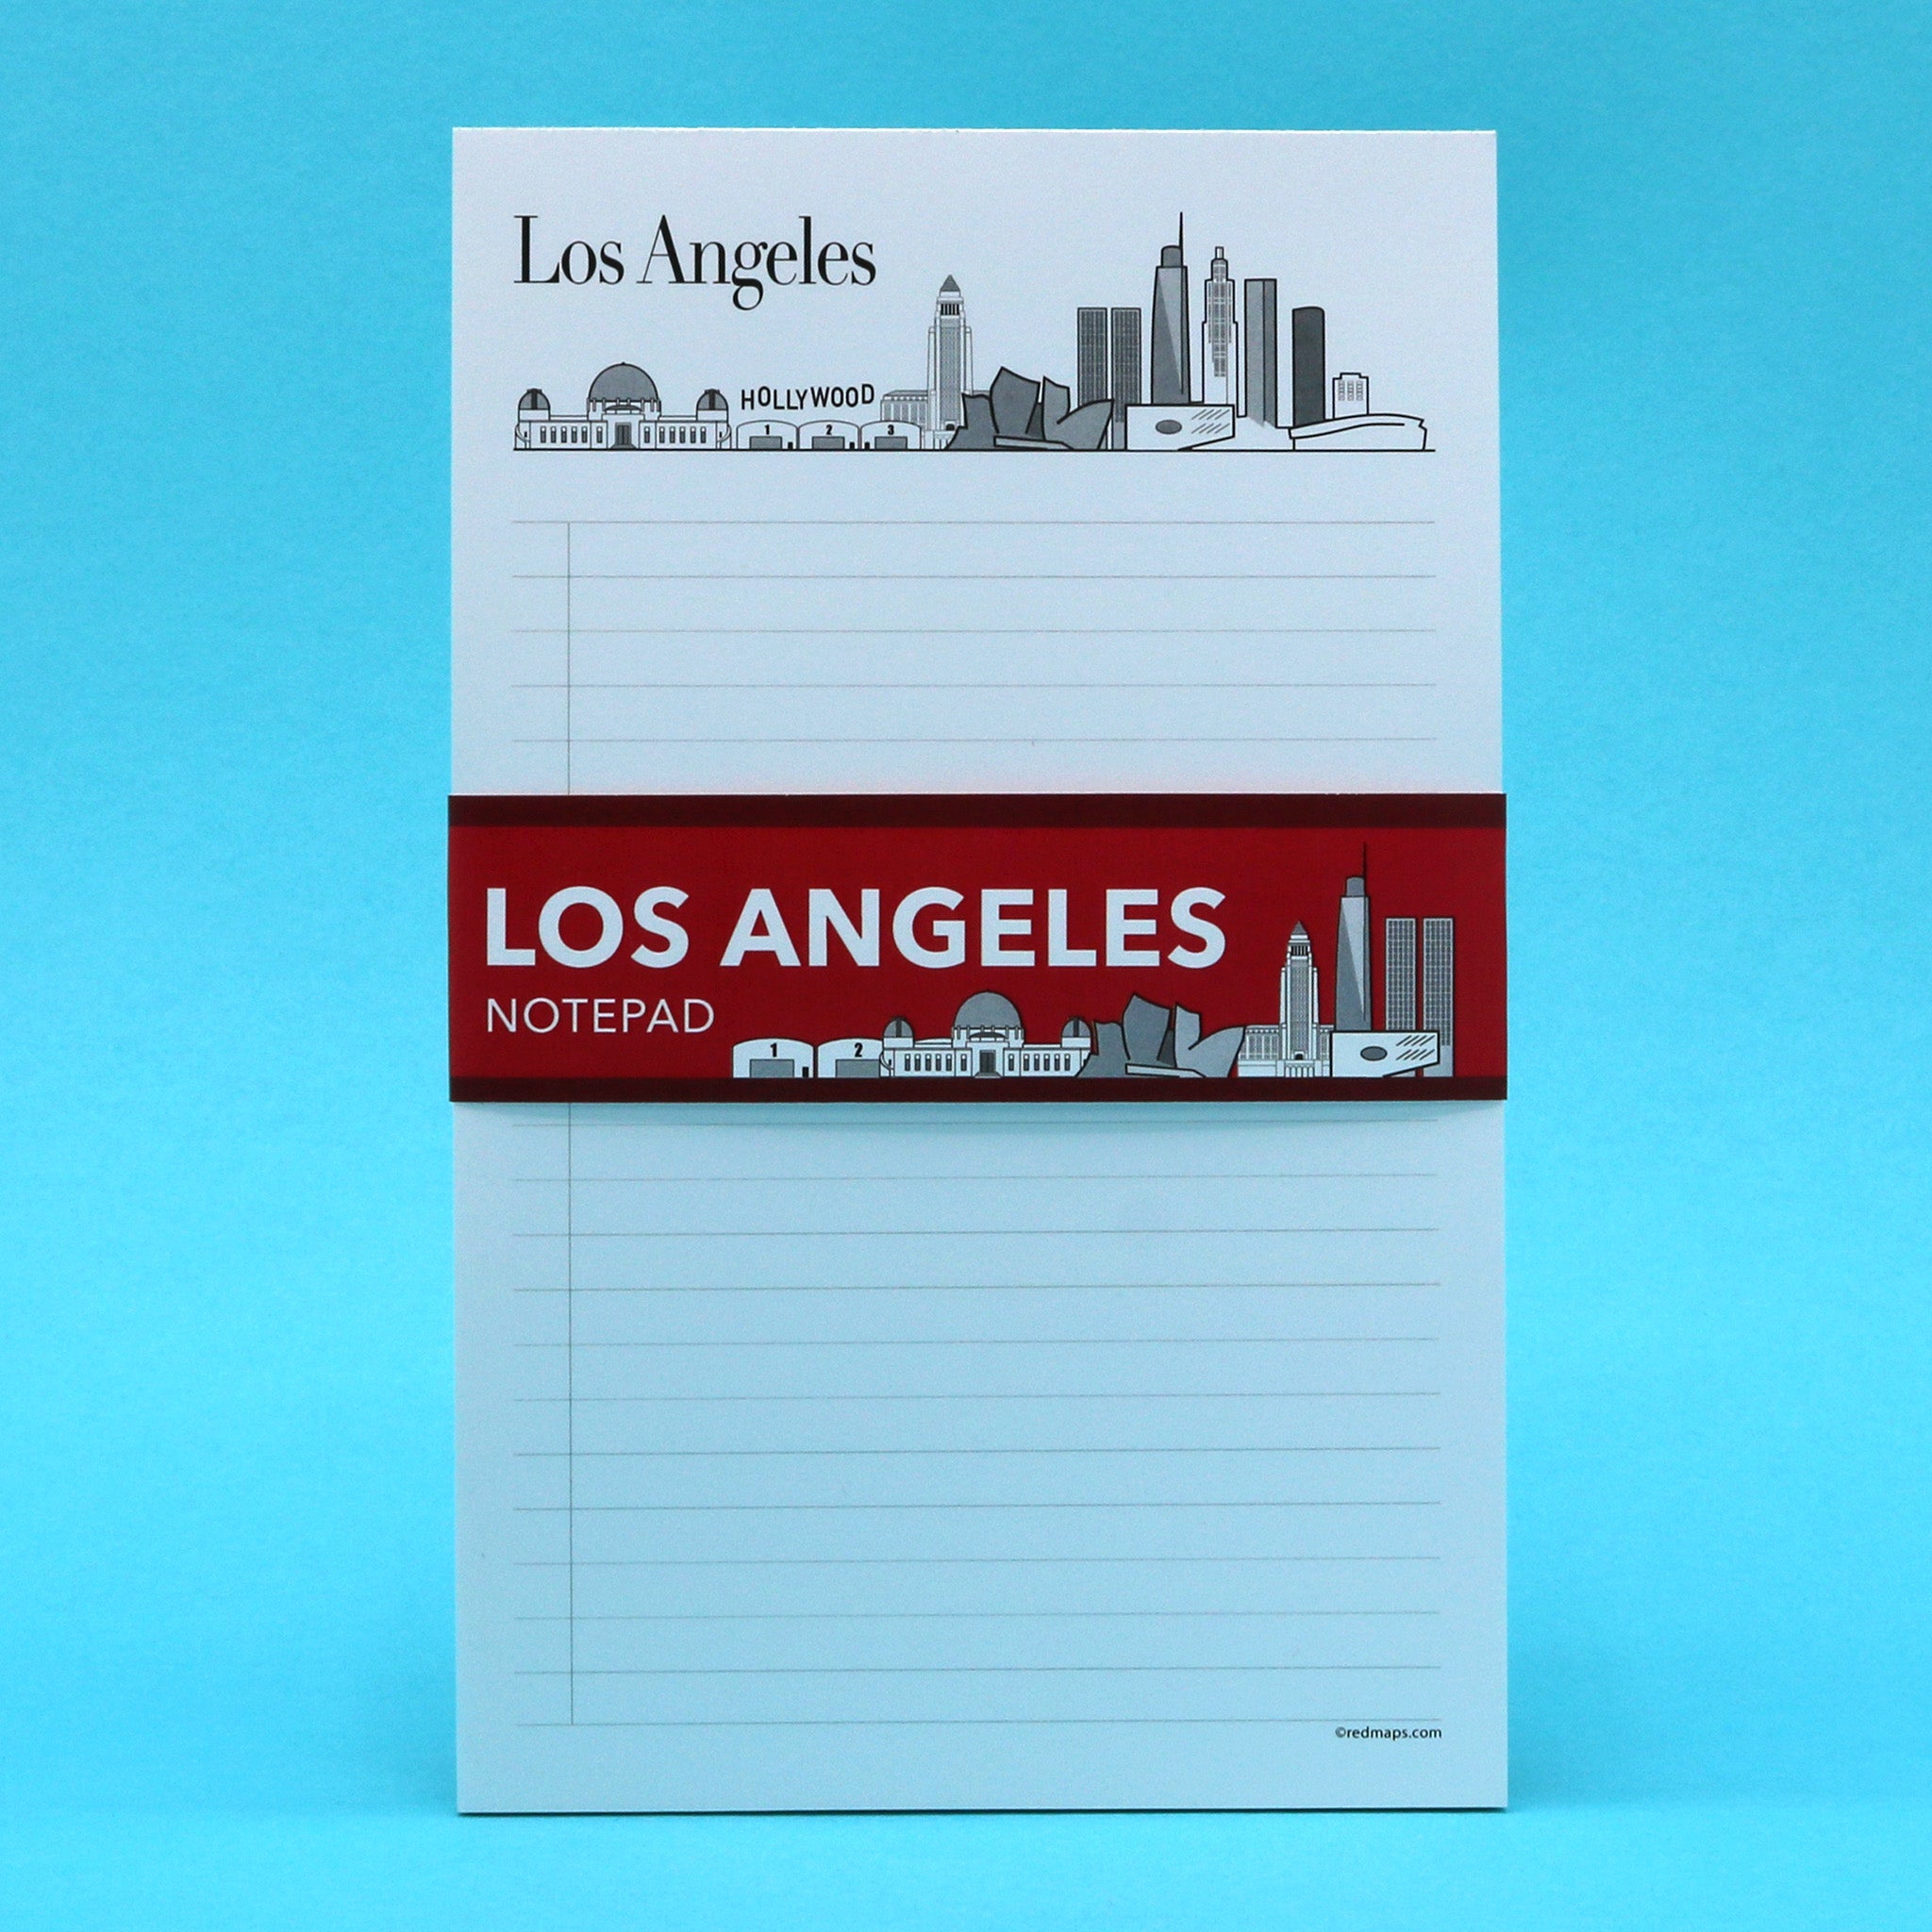 Los Angeles themed writing pad with illustrations of the city's skyline and historic landmarks.